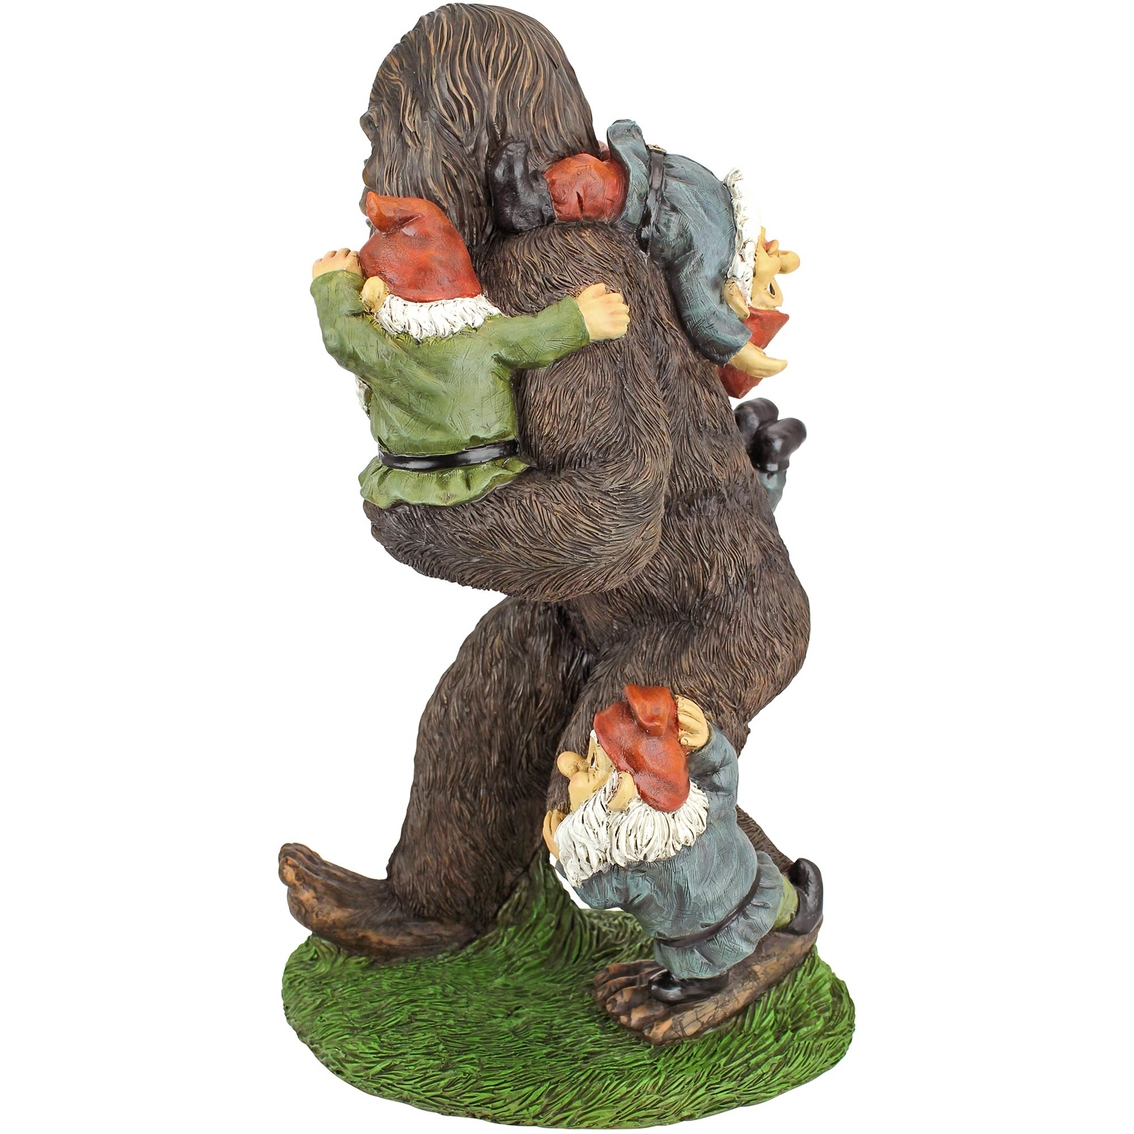 Design Toscano Schlepping the Garden Gnomes Bigfoot Statue - Image 3 of 4